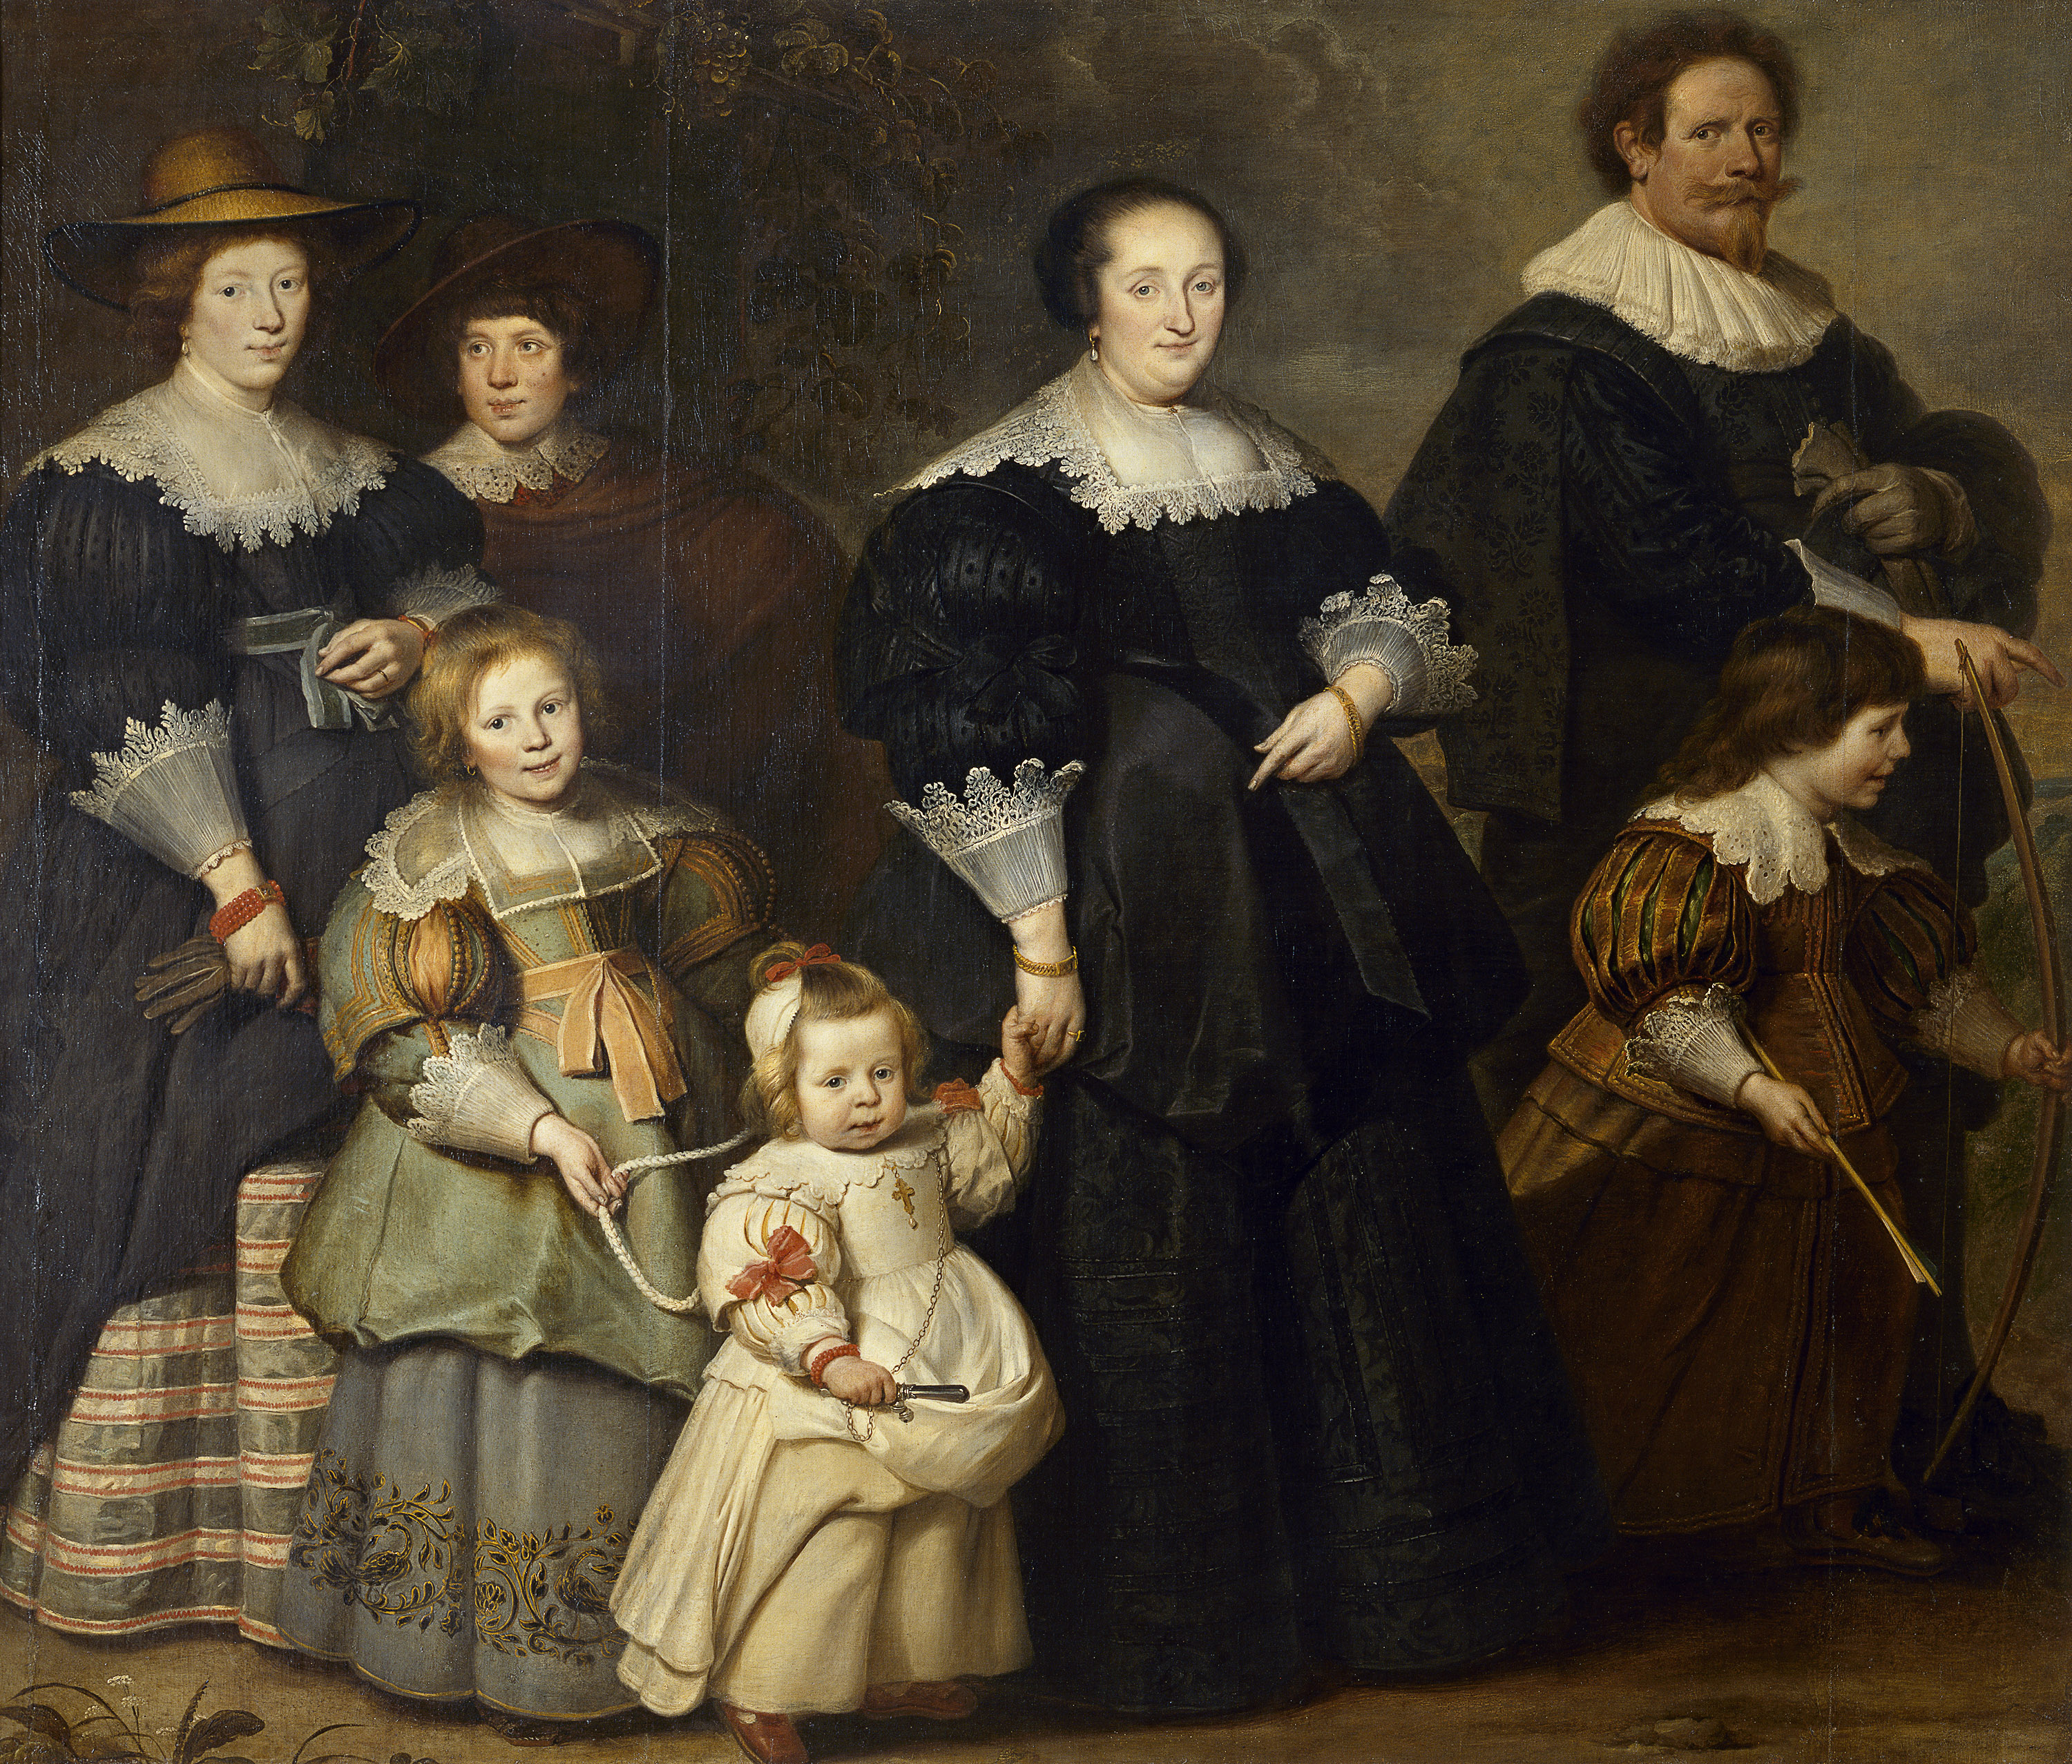 Cornelis de VOS, (Dutch/Flemish(c. 1584–1651), Self-portrait of the artist with his wife Suzanne Cock and their children (c. 1634), oil on canvas, 185.5 х 221.0 cm,  The State Hermitage Museum, St Petersburg,  (Inv. no. ГЭ-623), Donated by Prince G. A. Potemkin, 1780s